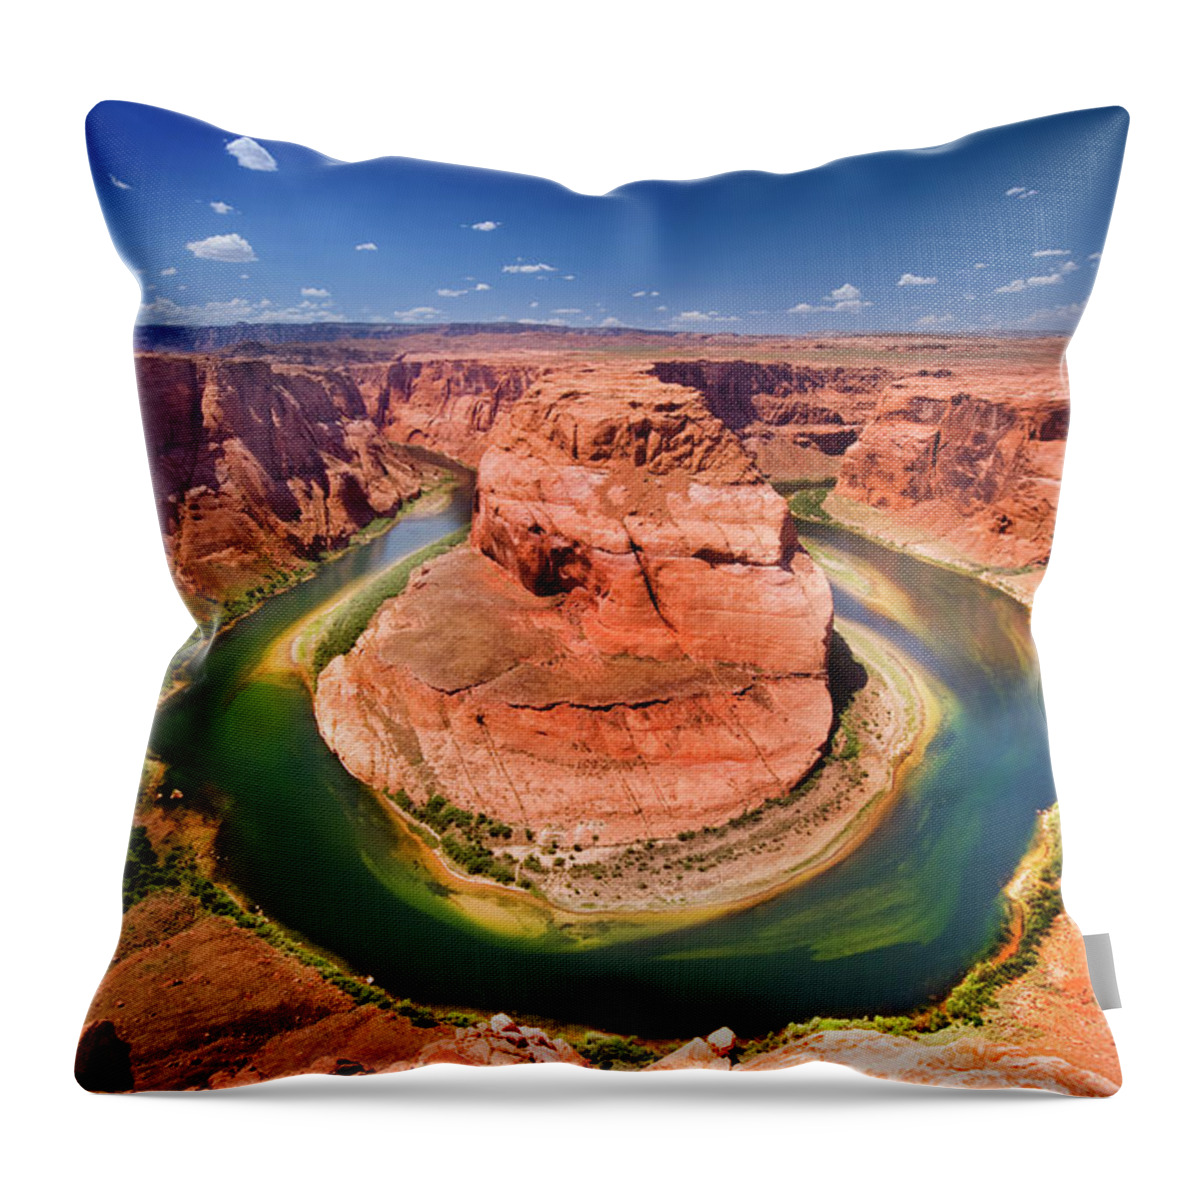 Scenics Throw Pillow featuring the photograph Horseshoe Bend by Beausnyder